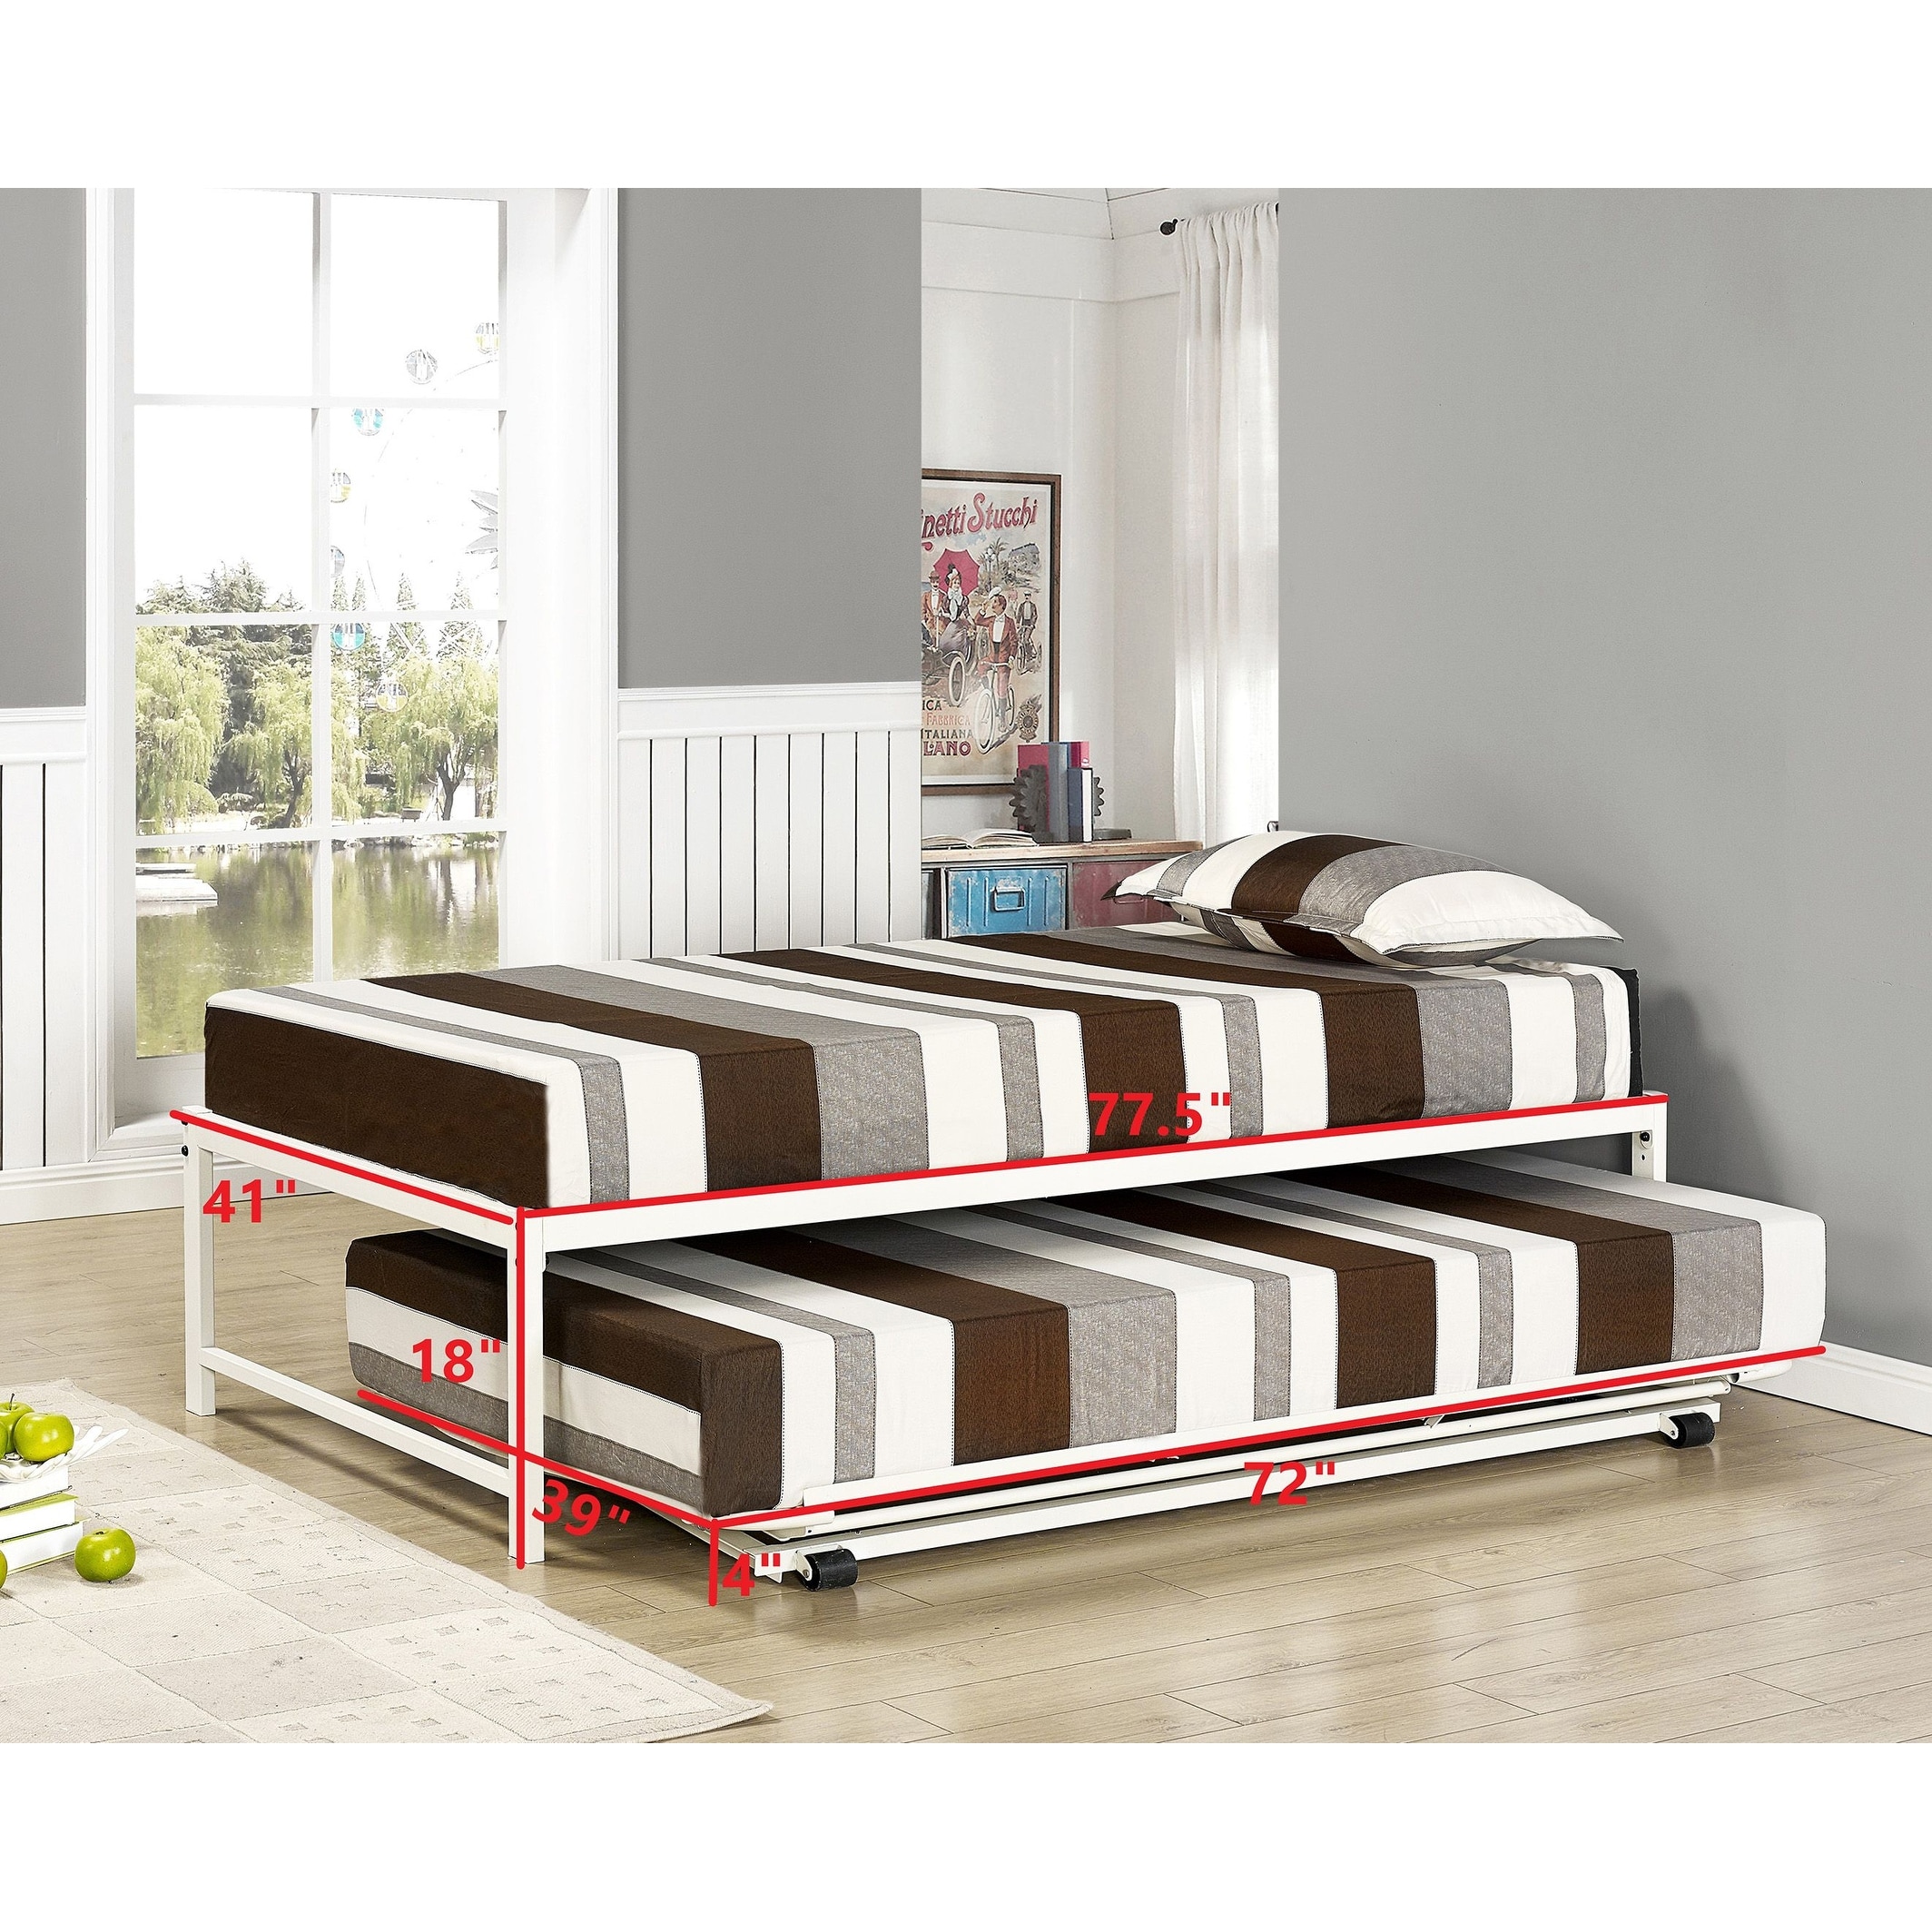 https://ak1.ostkcdn.com/images/products/is/images/direct/d56a45af062853218824f870371e703c888f6865/Hi-Riser-Twin-Bed-With-Pop-Up-Trundle.jpg